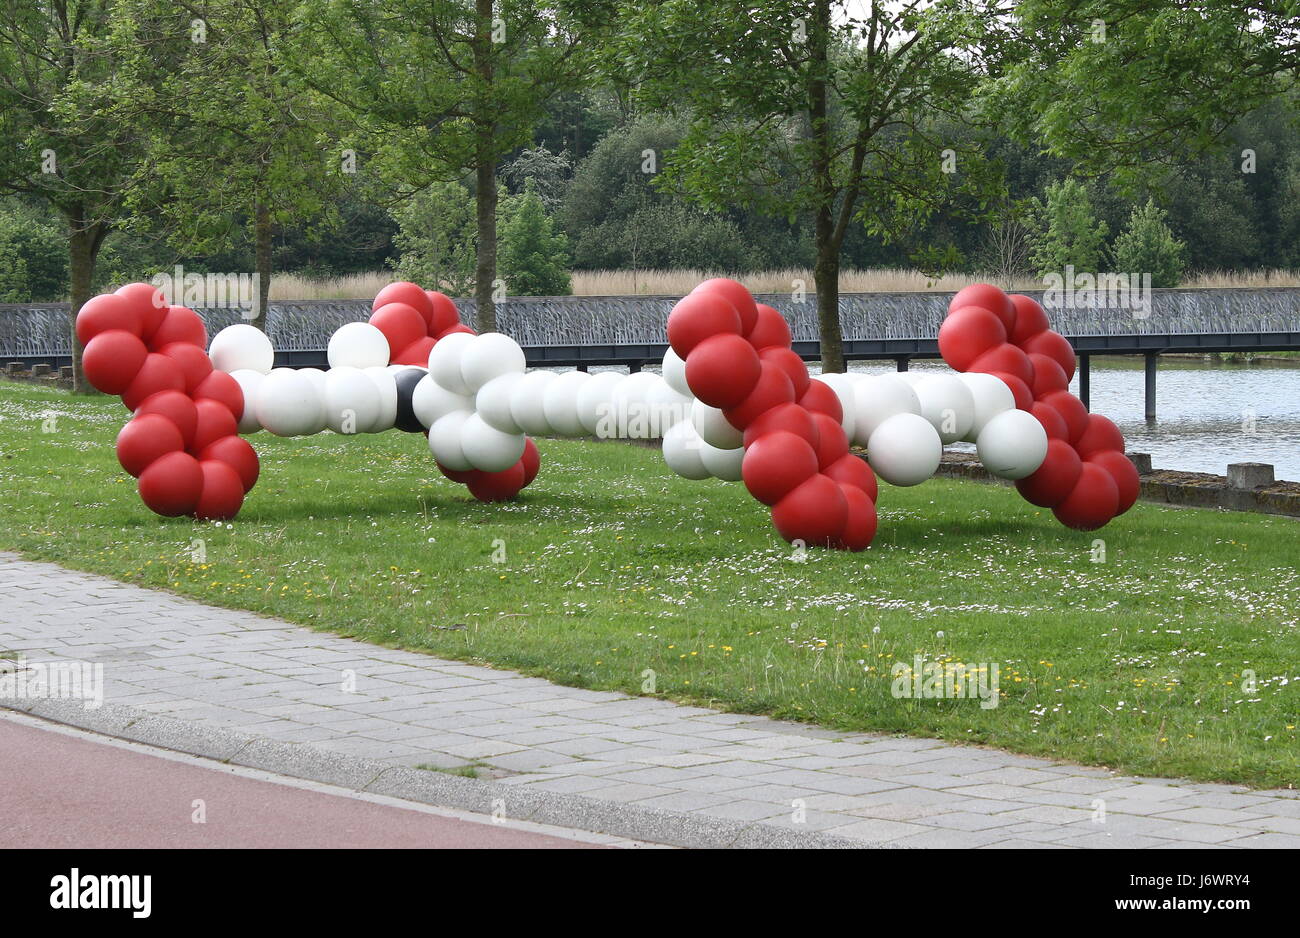 Model of an electrically driven nanocar by Groningen University chemist Ben Feringa, Chemistry Nobel Prize winner in 2016. Located at Zernike campus. Stock Photo